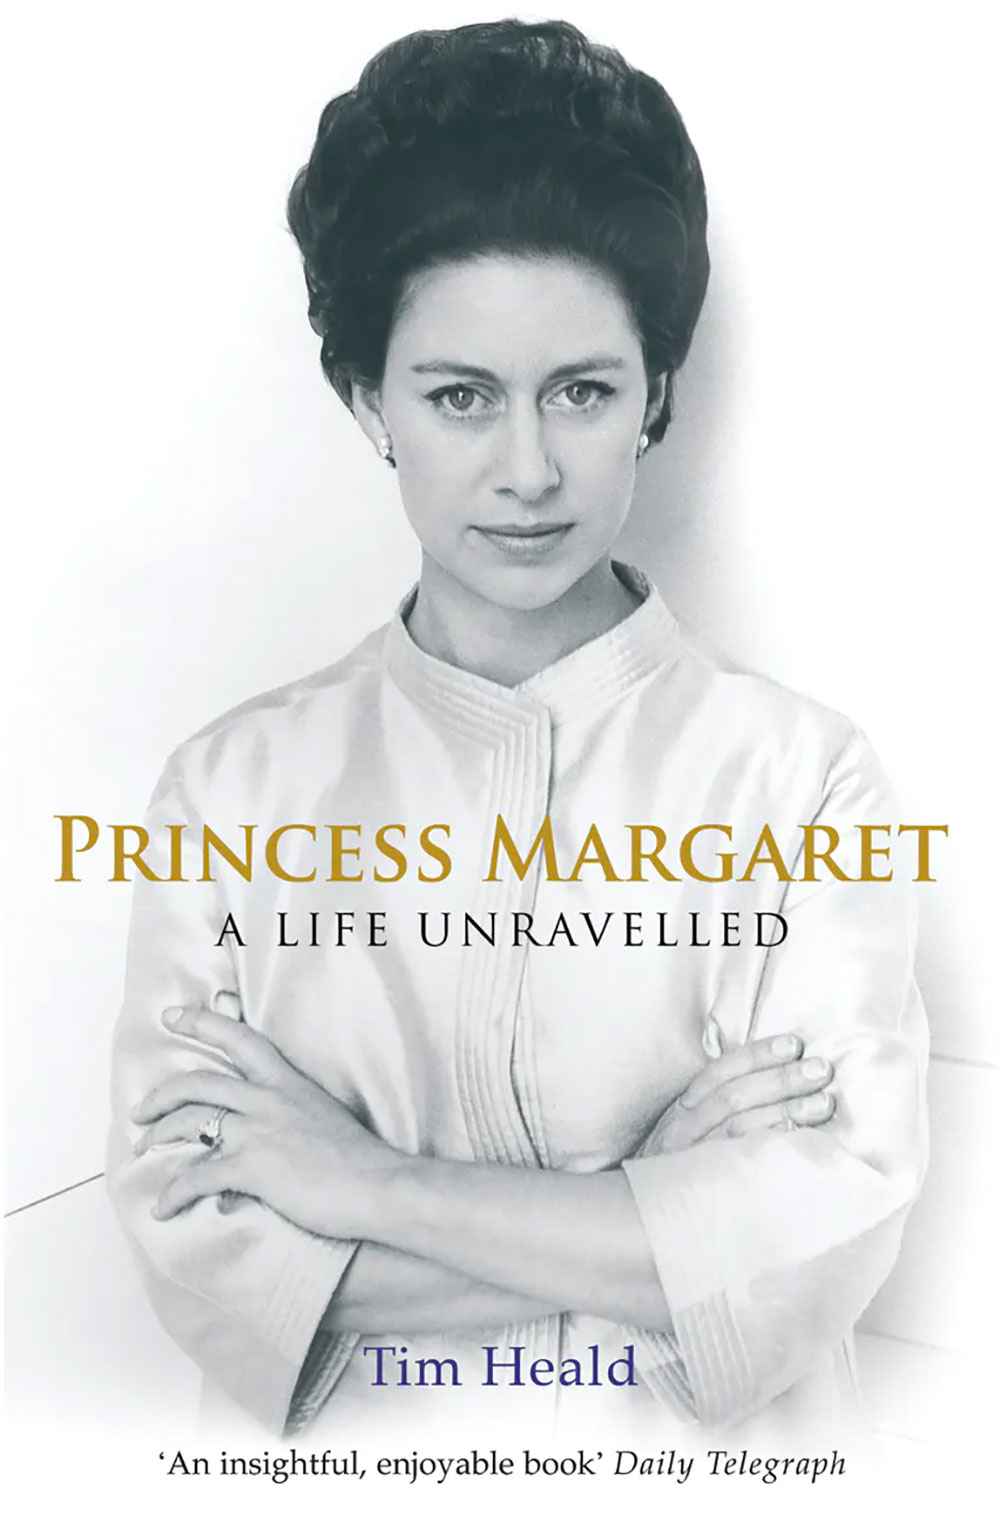 Princess Margaret: A Life Unravelled by Tim Heald